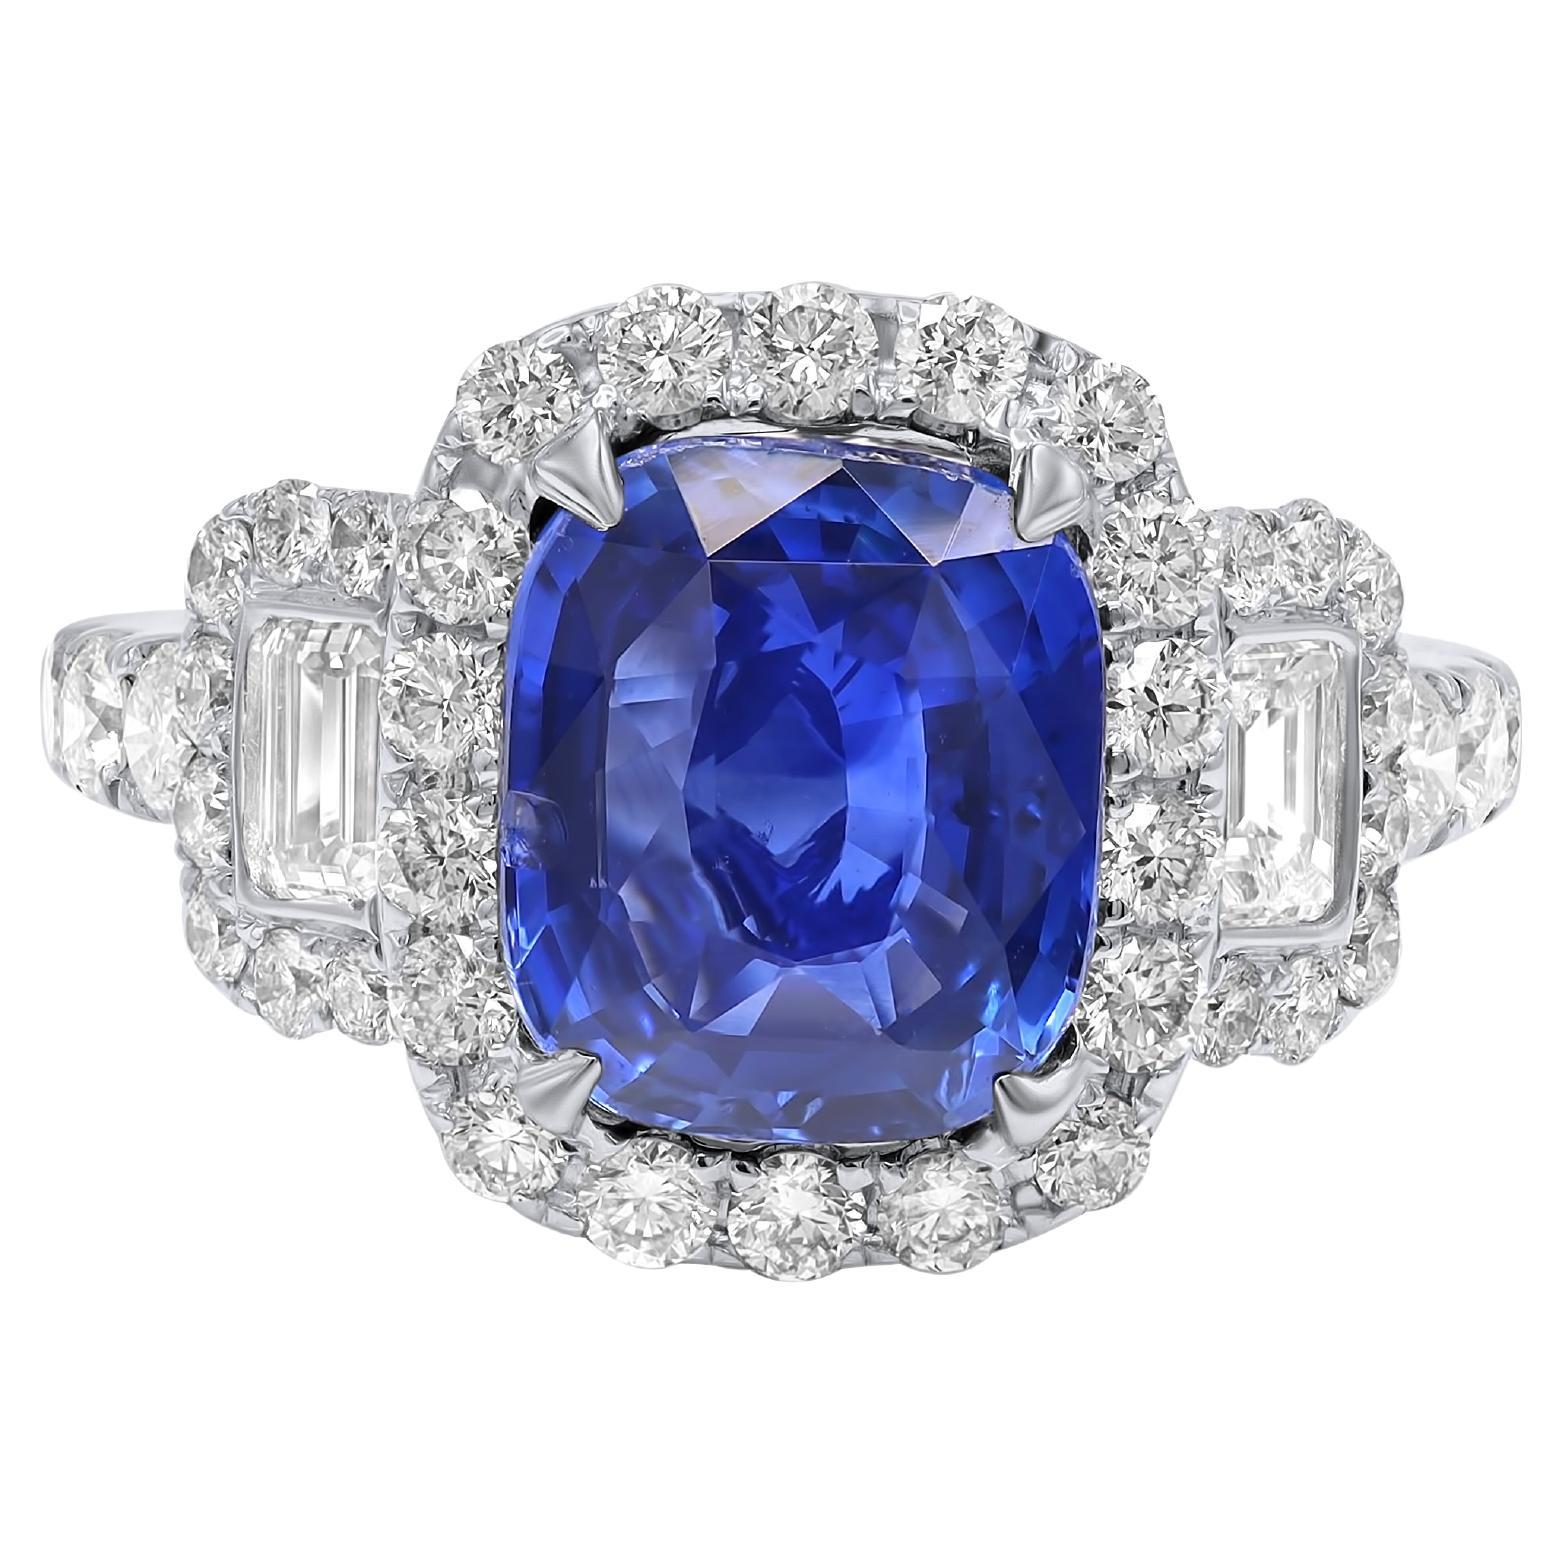 Diana M. 18 kt white gold sapphire diamond ring featuring a 3.58 ct  For Sale